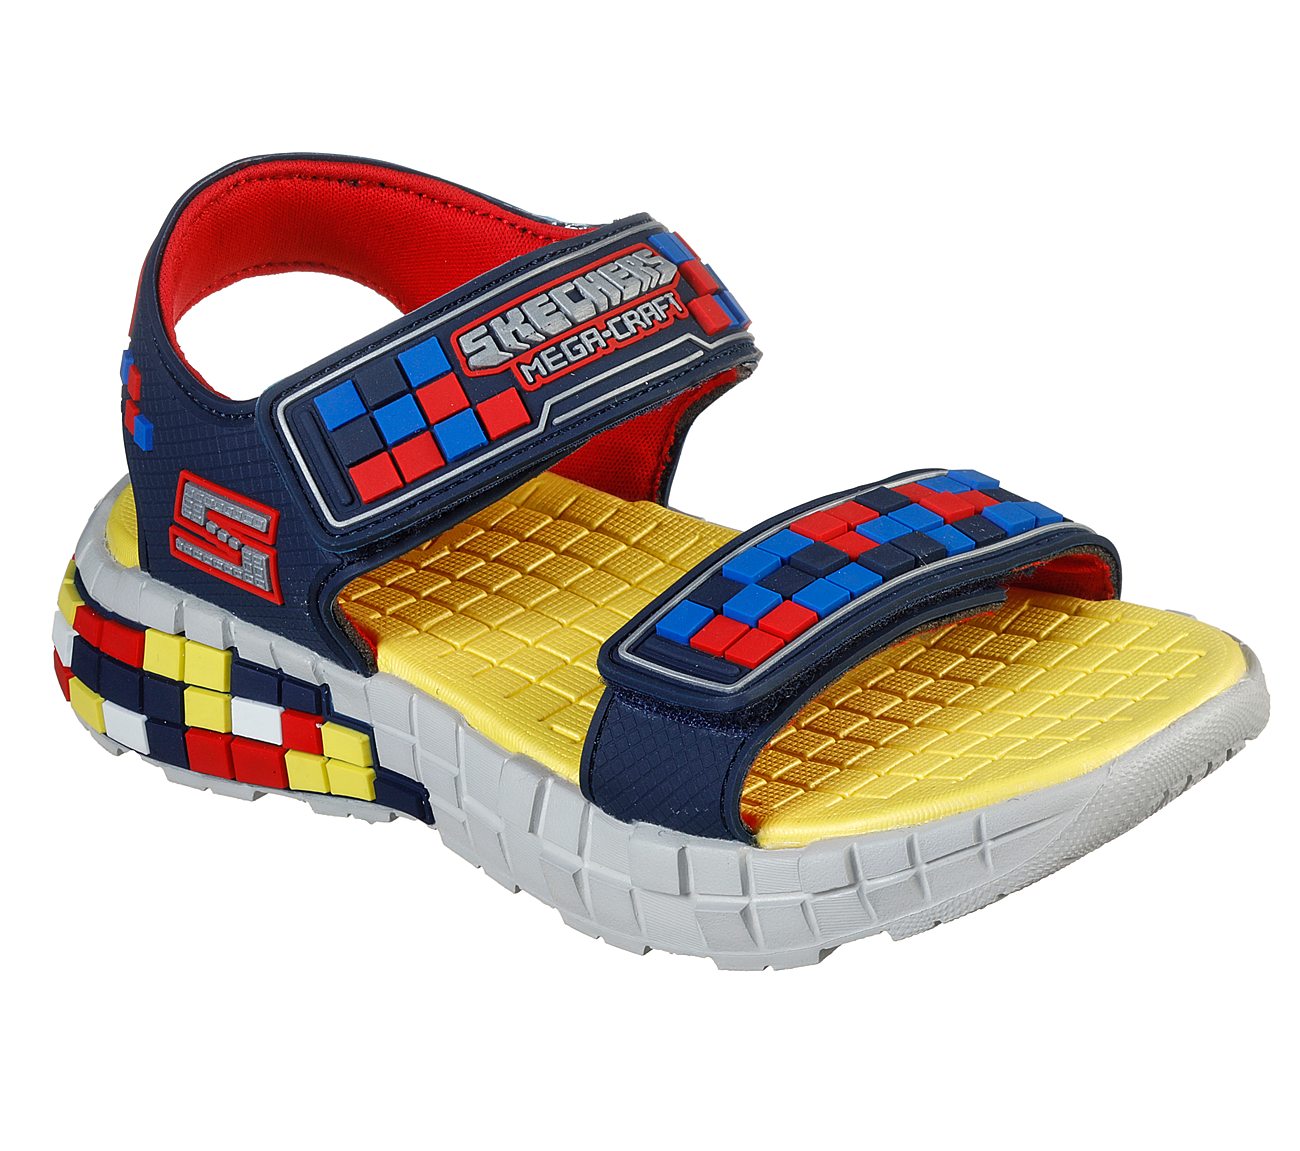 MEGA-CRAFT SANDAL, NAVY/RED Footwear Lateral View